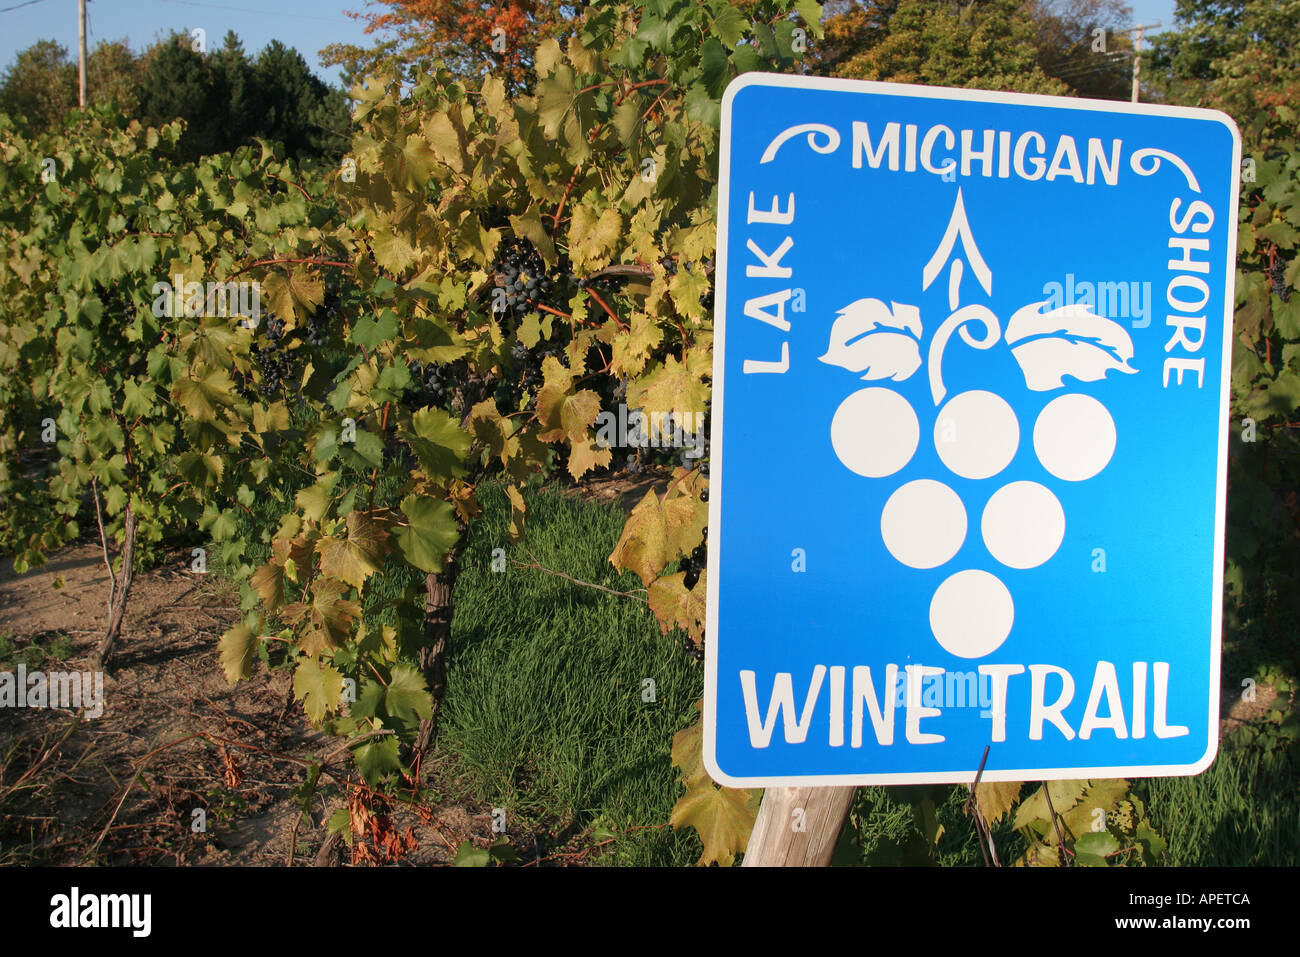 Michigan,MI,Mich,Upper Midwest,Fennville,Fenn Valley Vineyards and Wine Cellar,information,broadcast,publier,message,annoncer,Lake Michigan Shore Win Banque D'Images